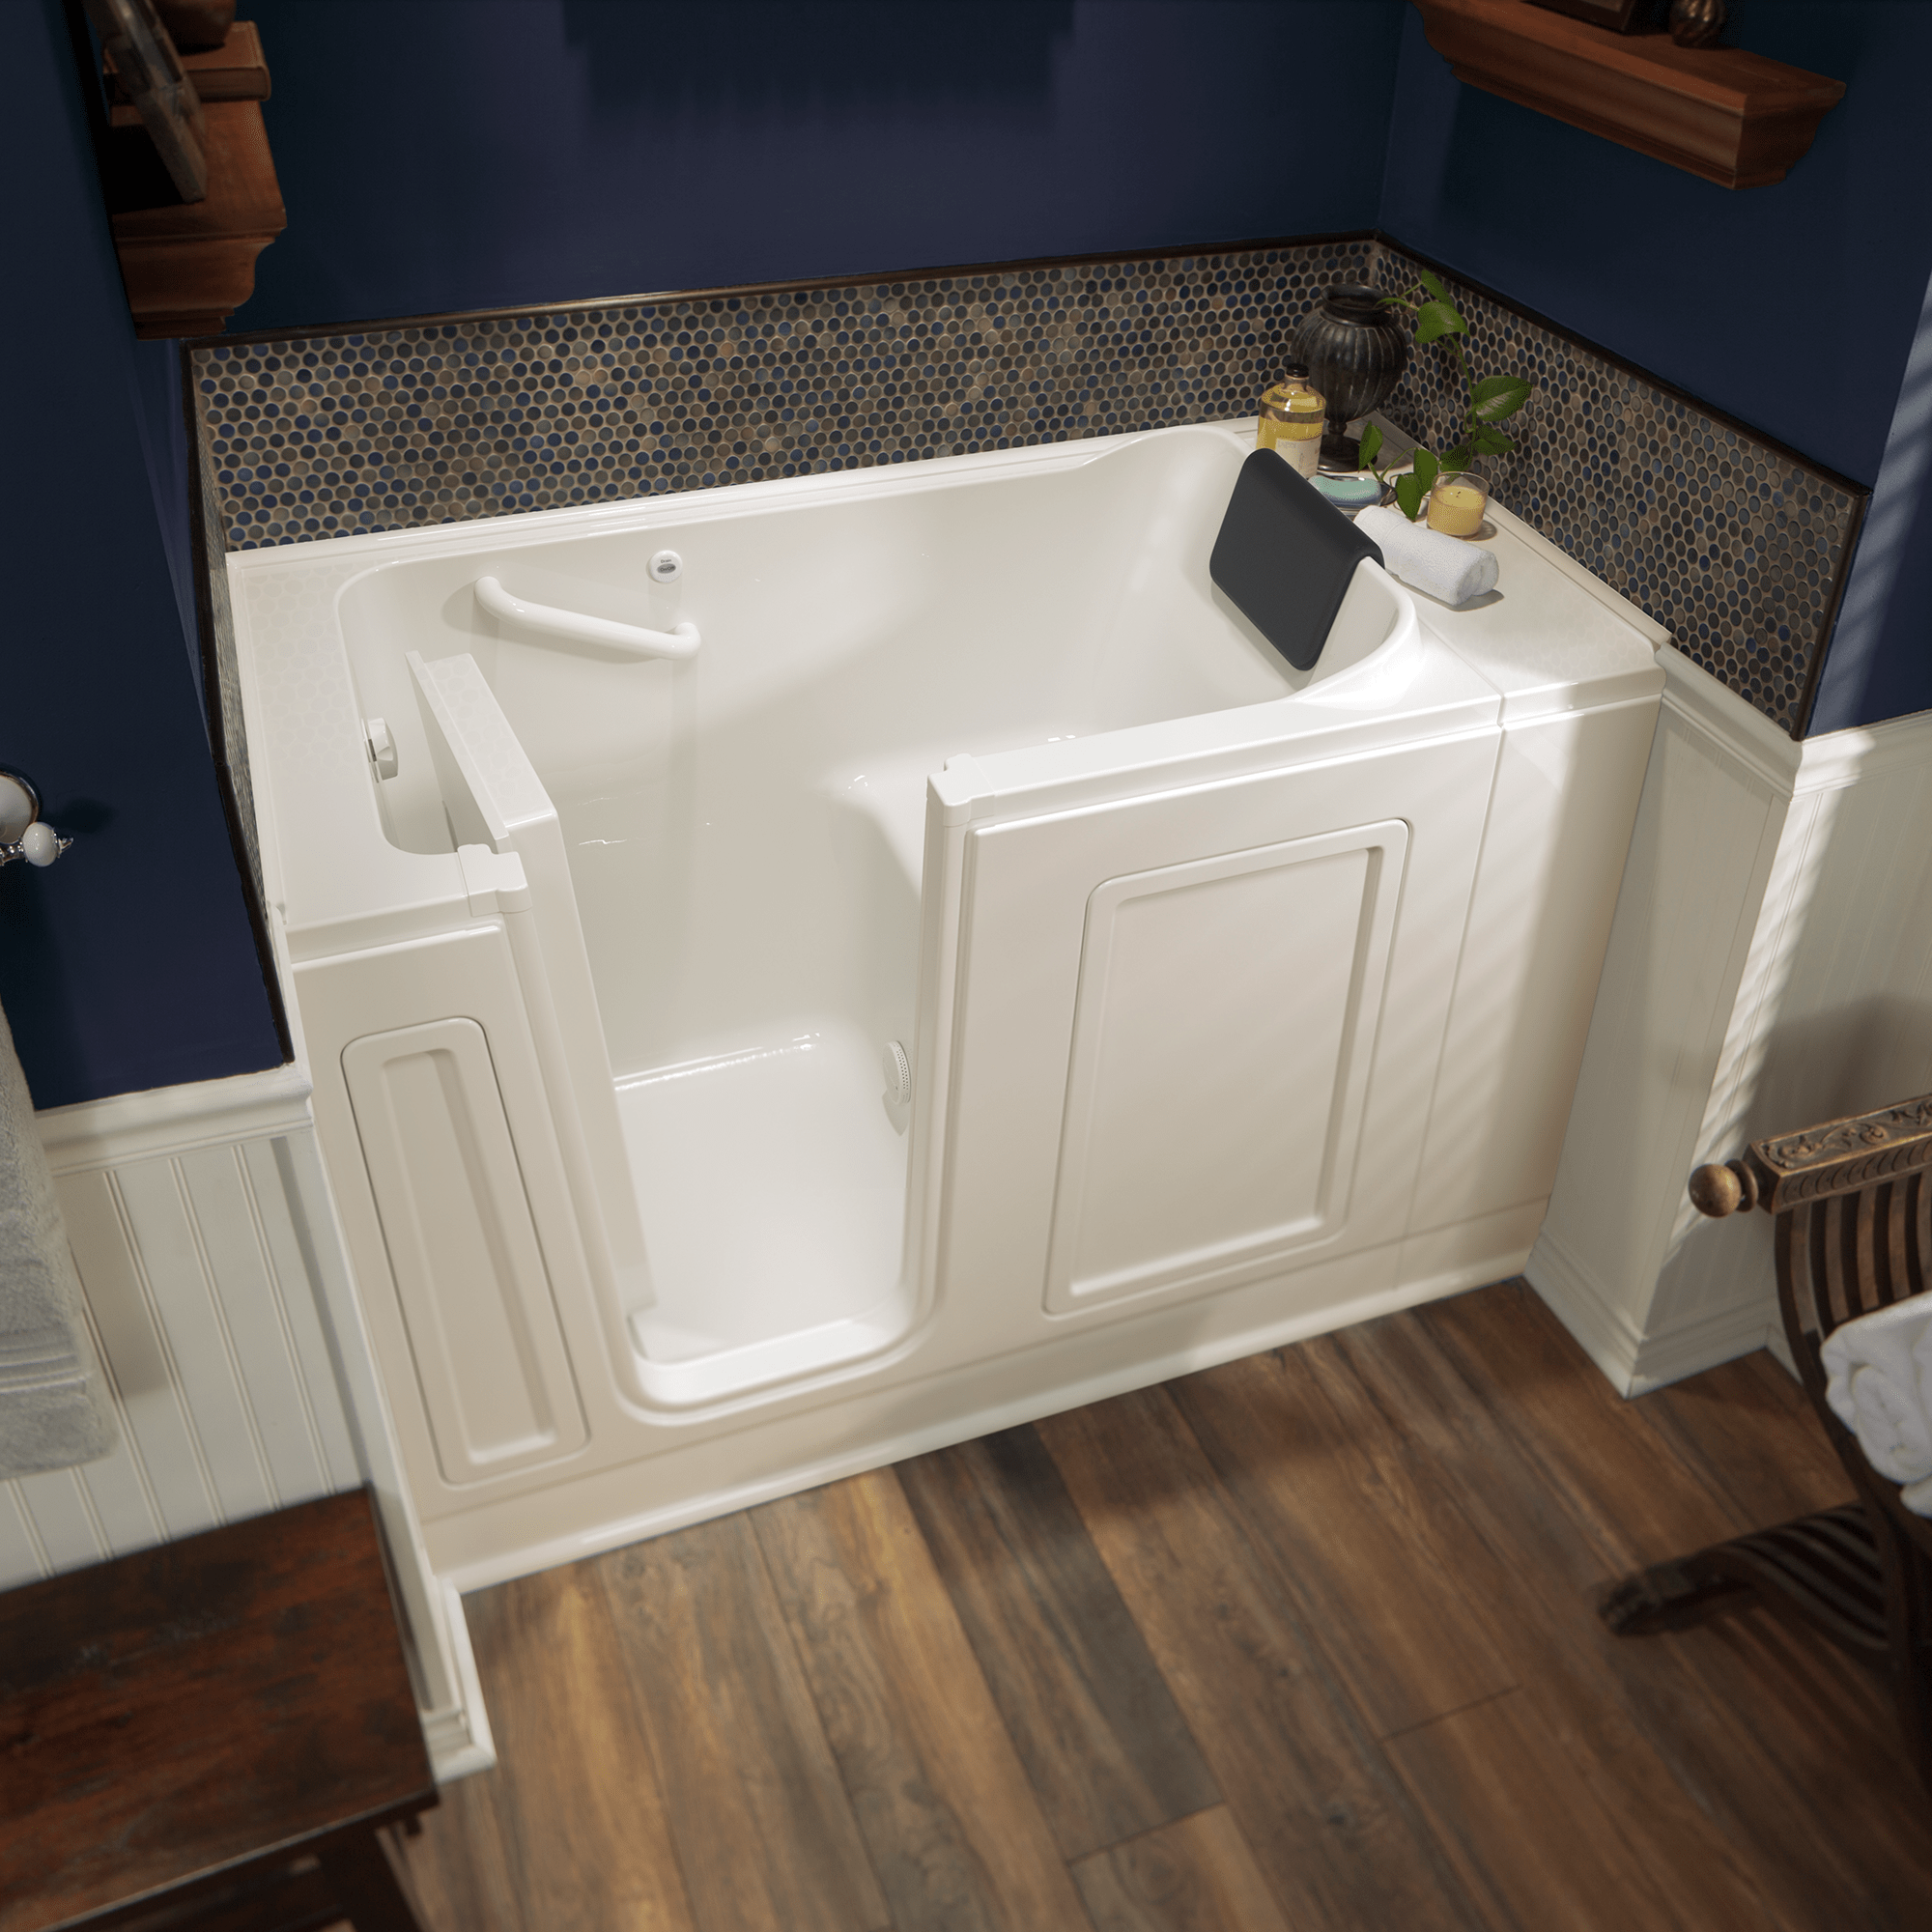 Acrylic Luxury Series 30 x 51 -Inch Walk-in Tub With Soaker System - Left-Hand Drain